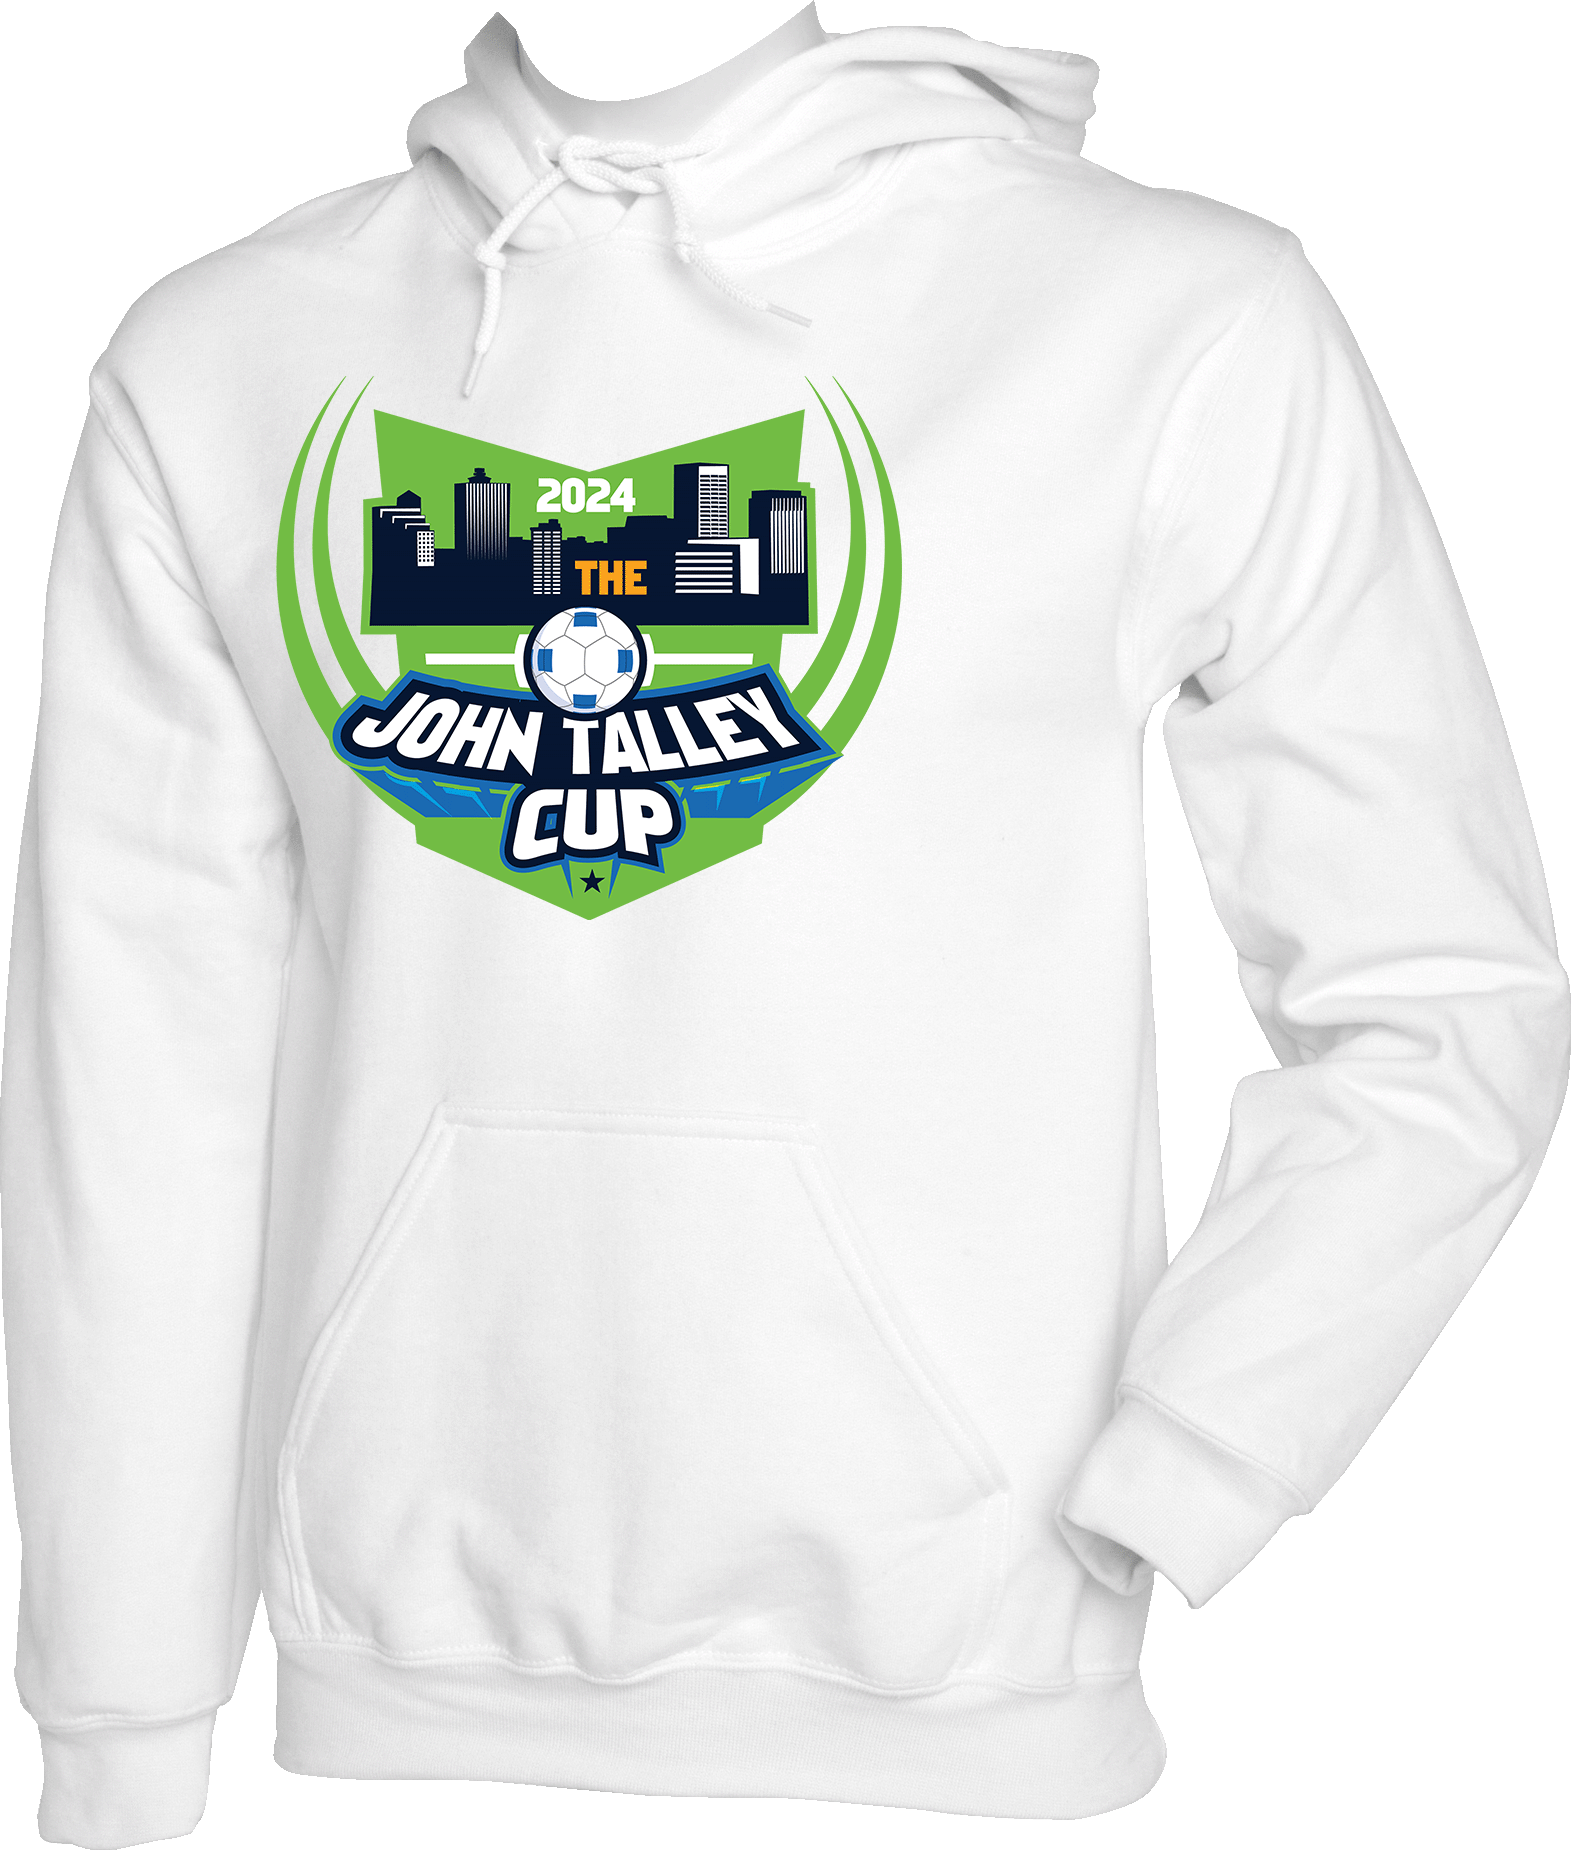 Hoodies - 2024 The John Talley Cup